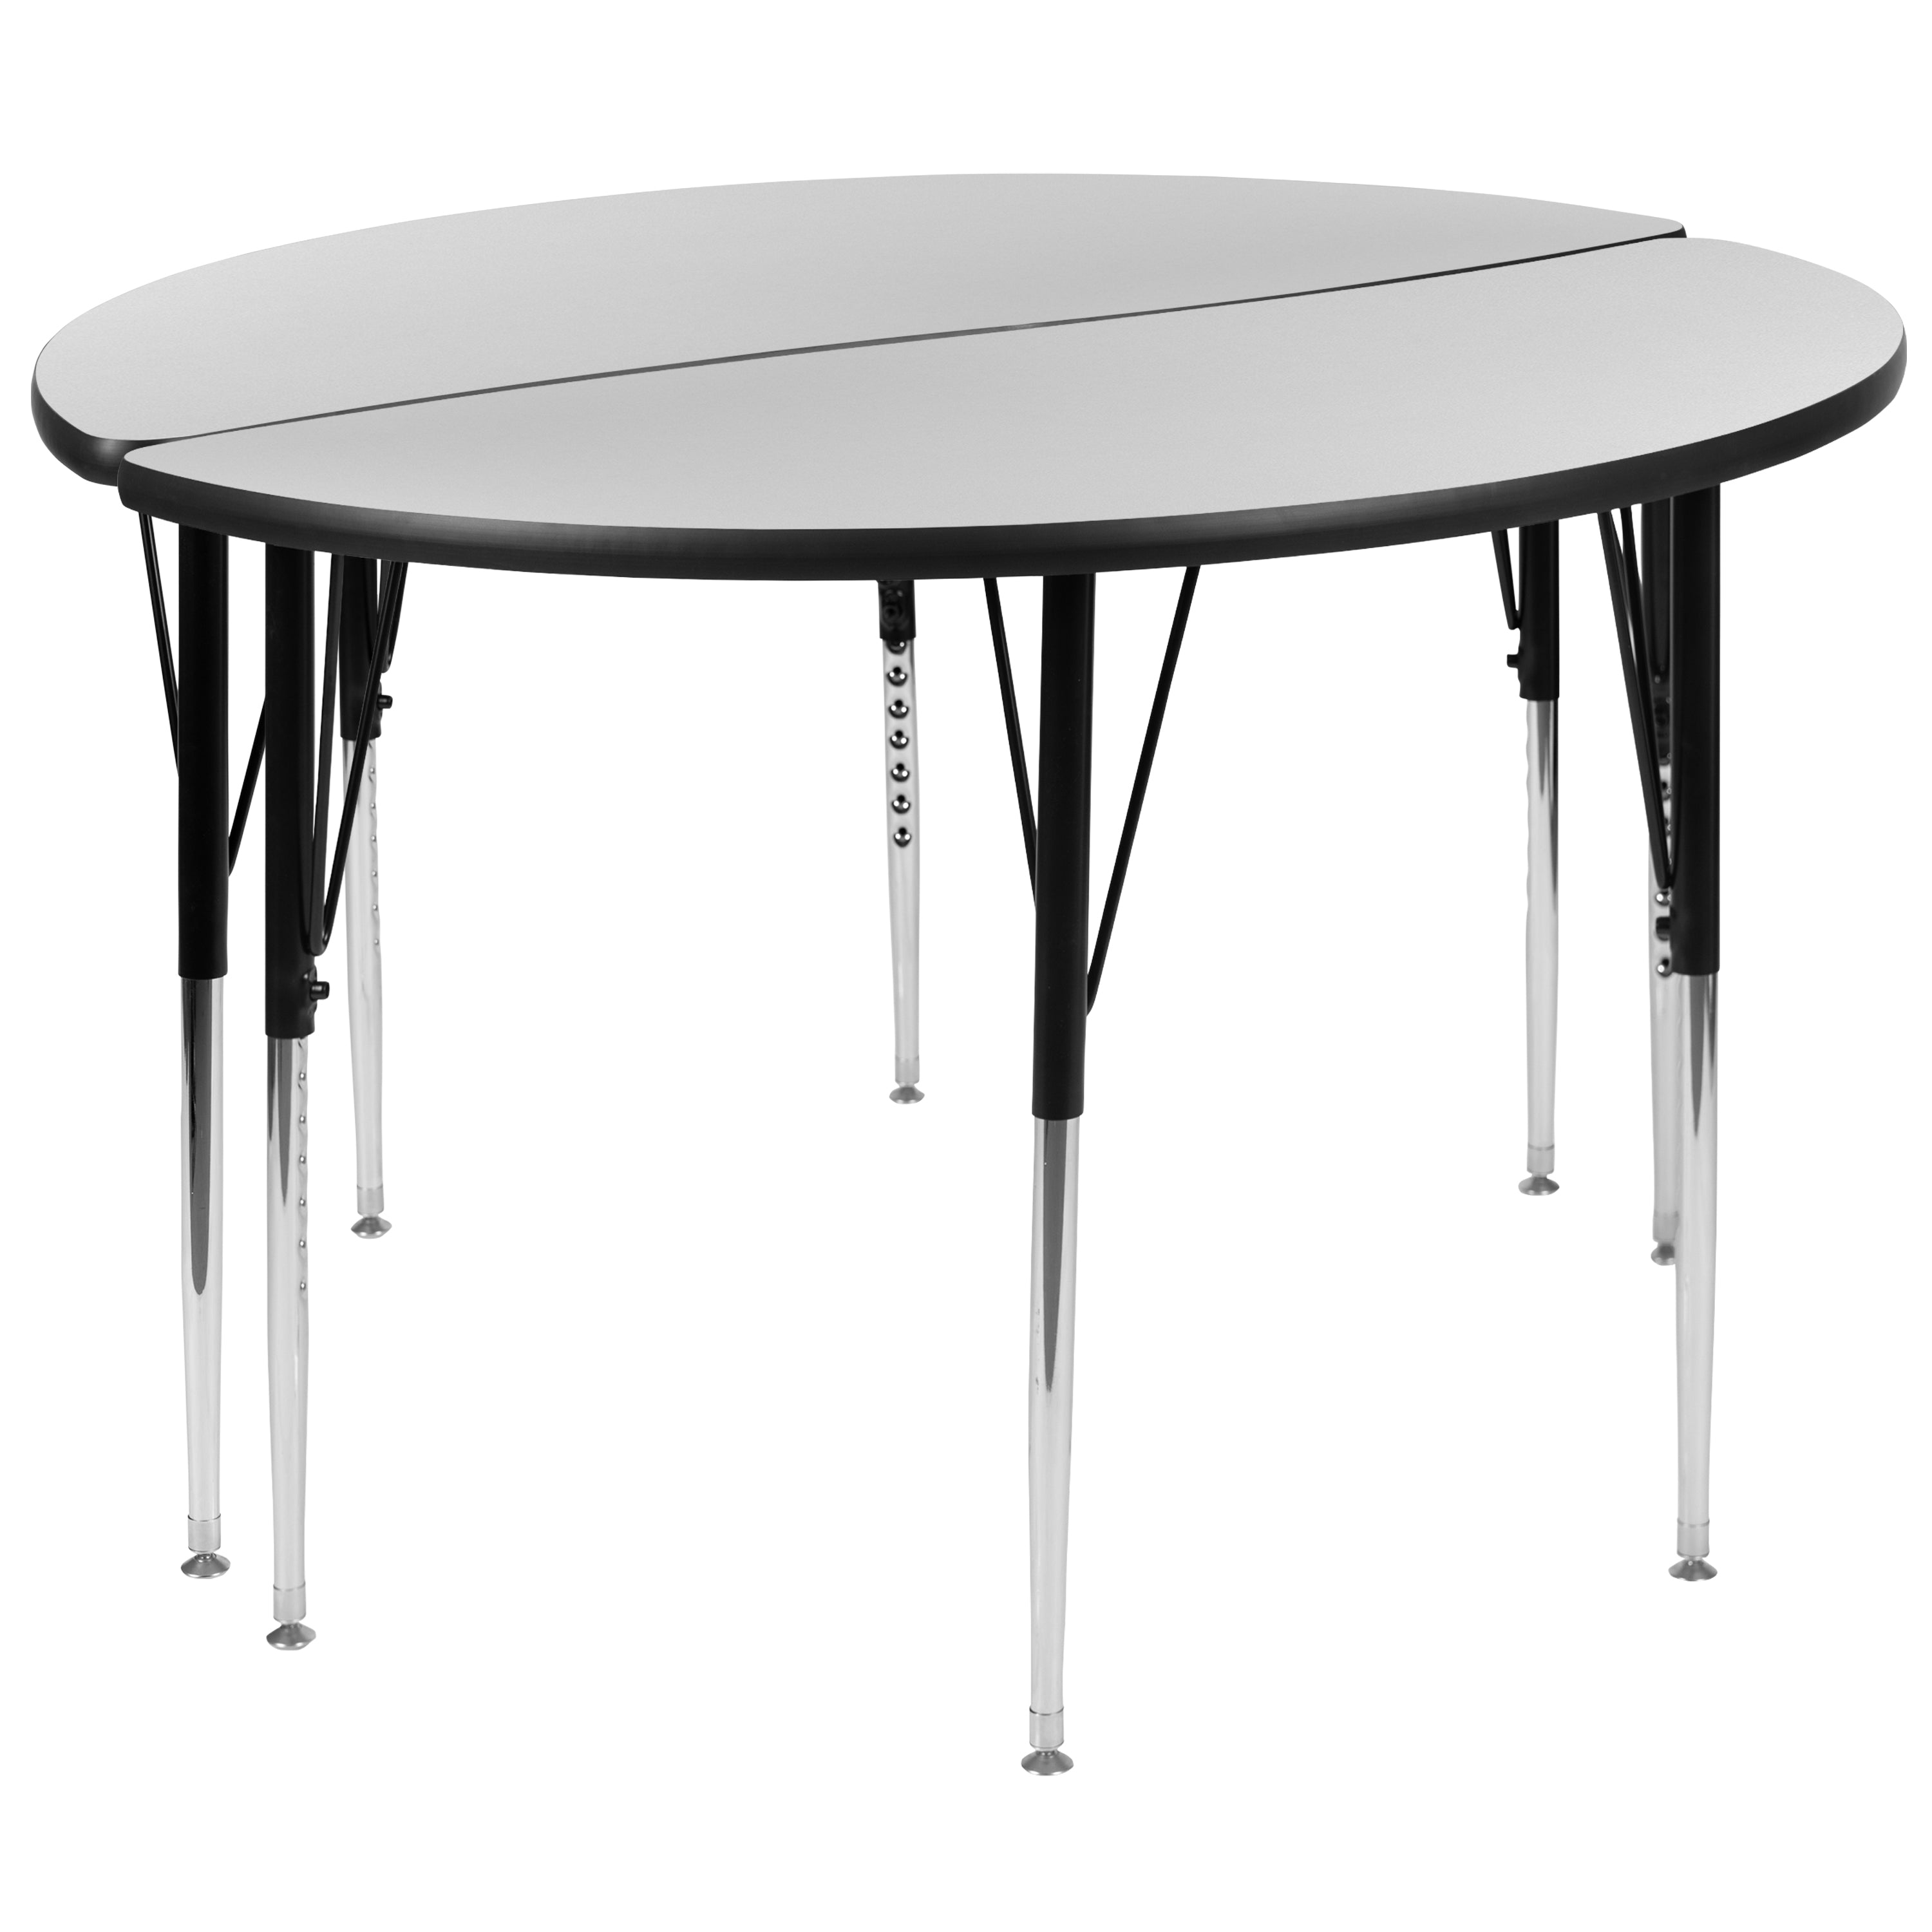 2 Piece 47.5" Circle Wave Flexible Grey Thermal Laminate Activity Table Set - Standard Height Adjustable Legs-Collaborative Activity Table Set-Flash Furniture-Wall2Wall Furnishings